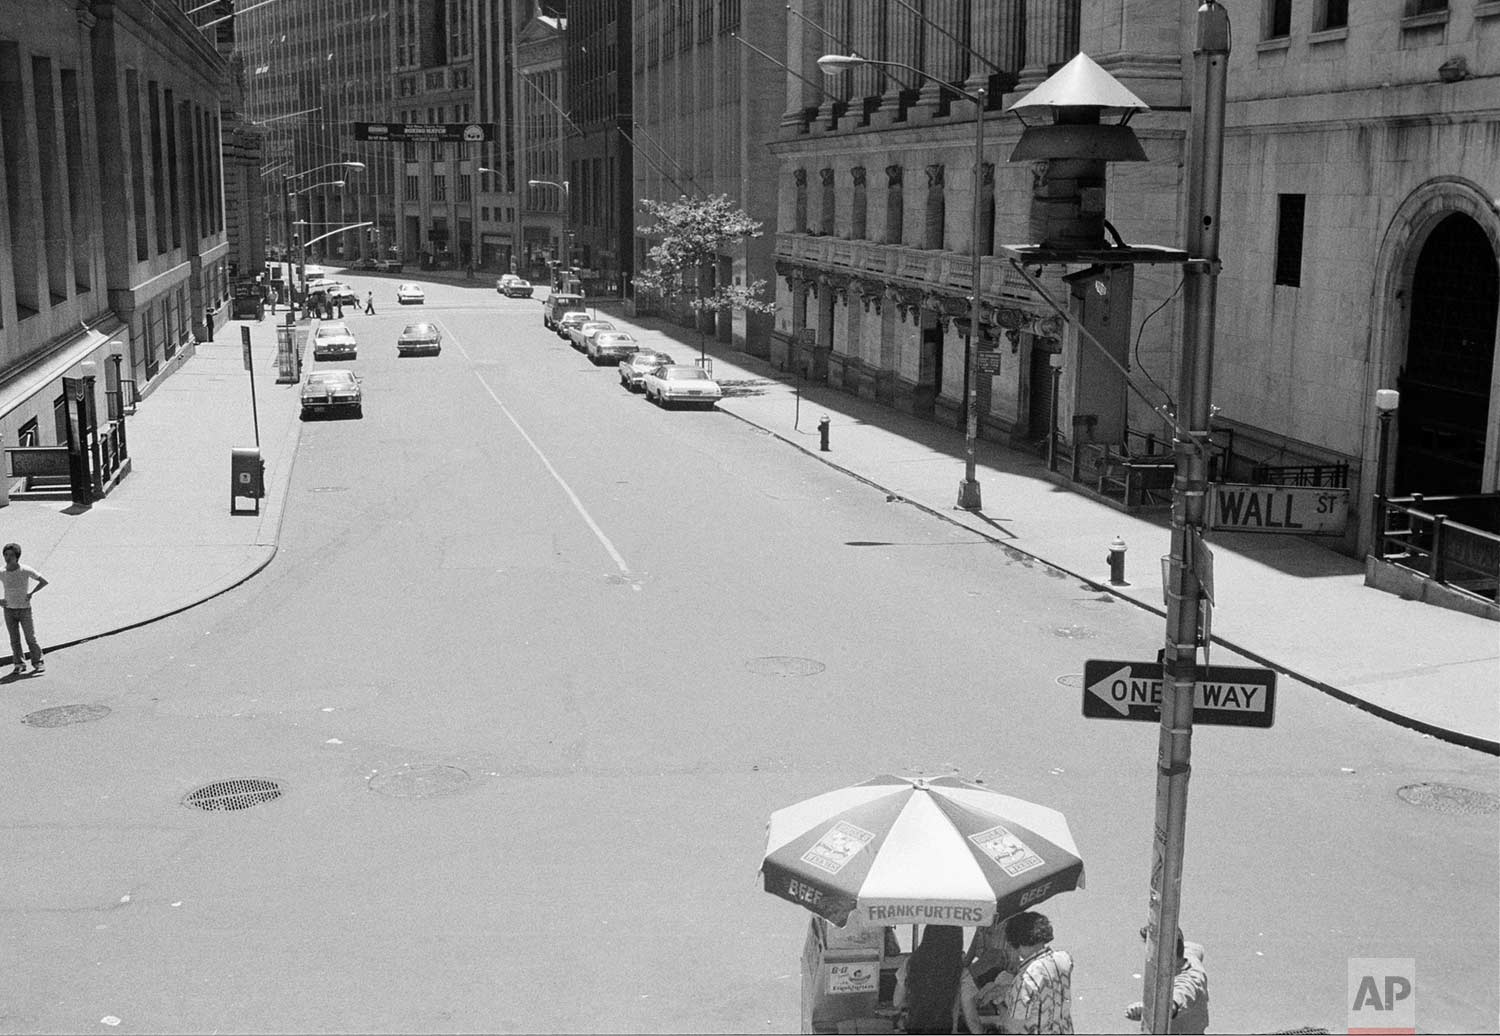  New York's Wall Street is deserted Thursday, July 14, 1977, after a massive power failure that lasted overnight from Wednesday forced the closing of the New York Stock Exchange.  (AP Photo) 